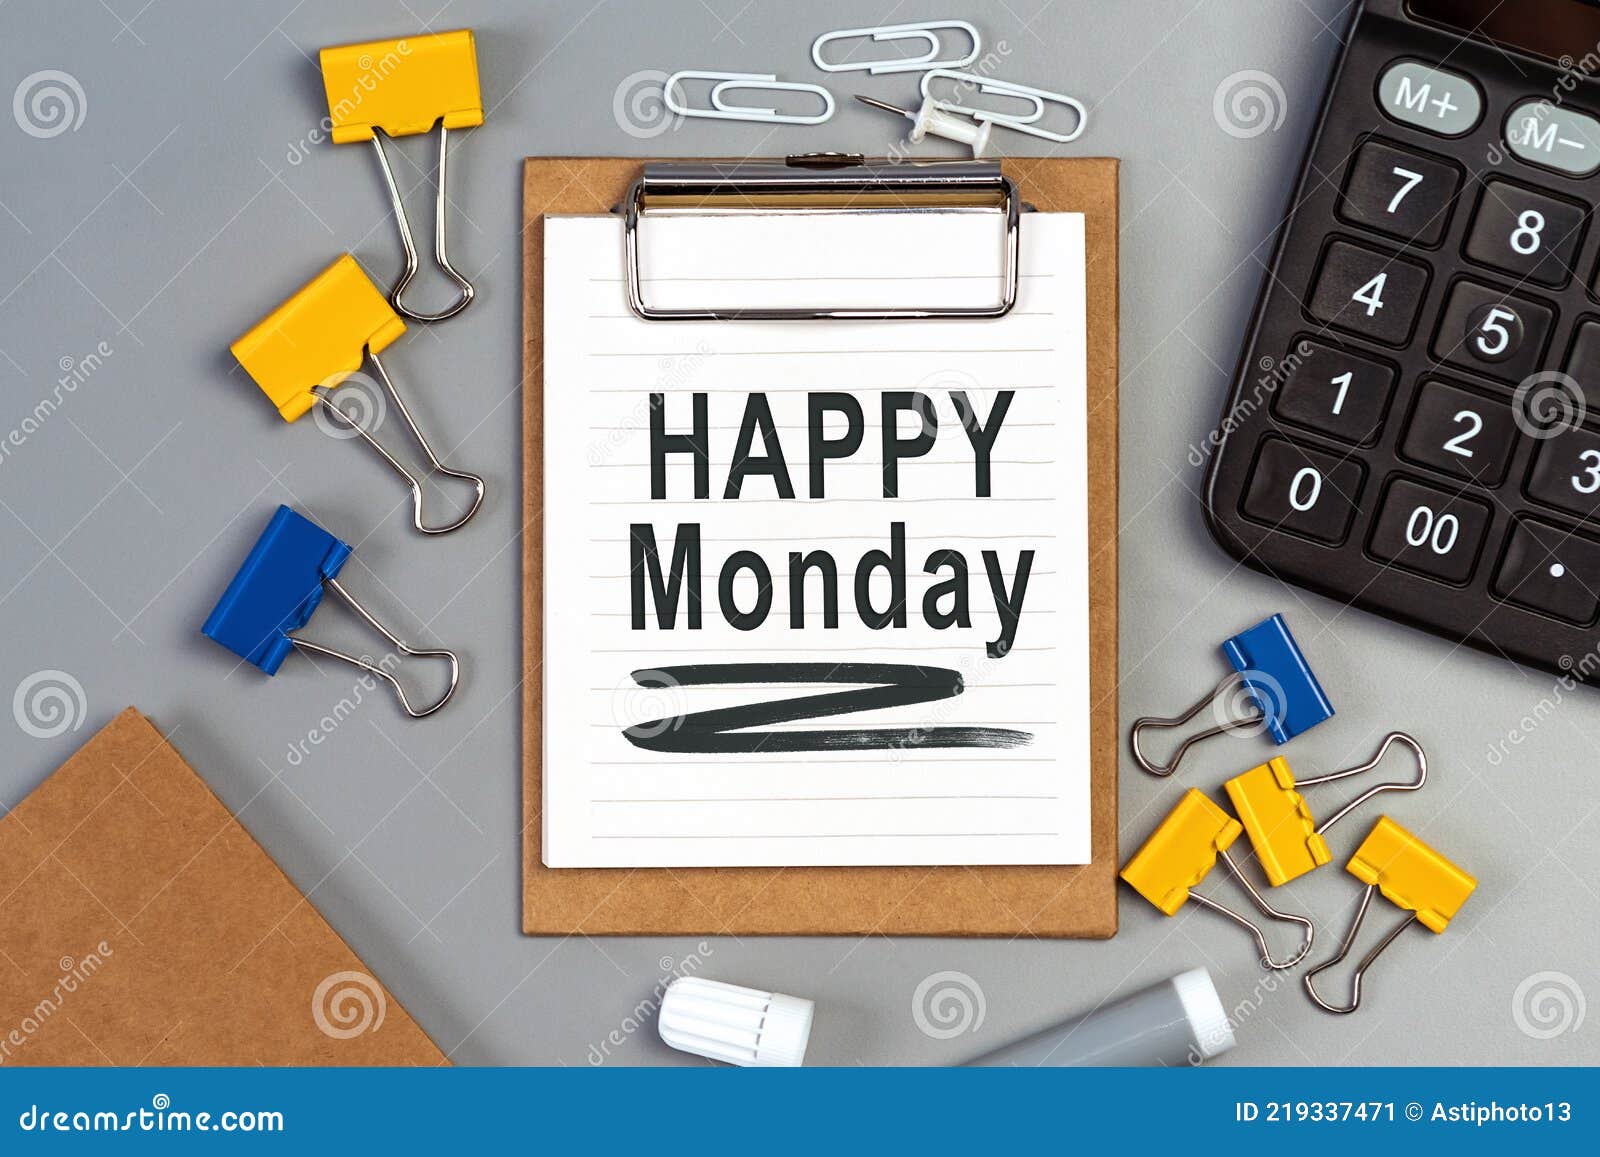 The Words Happy Monday Written on a White Notebook. Work and Study ...